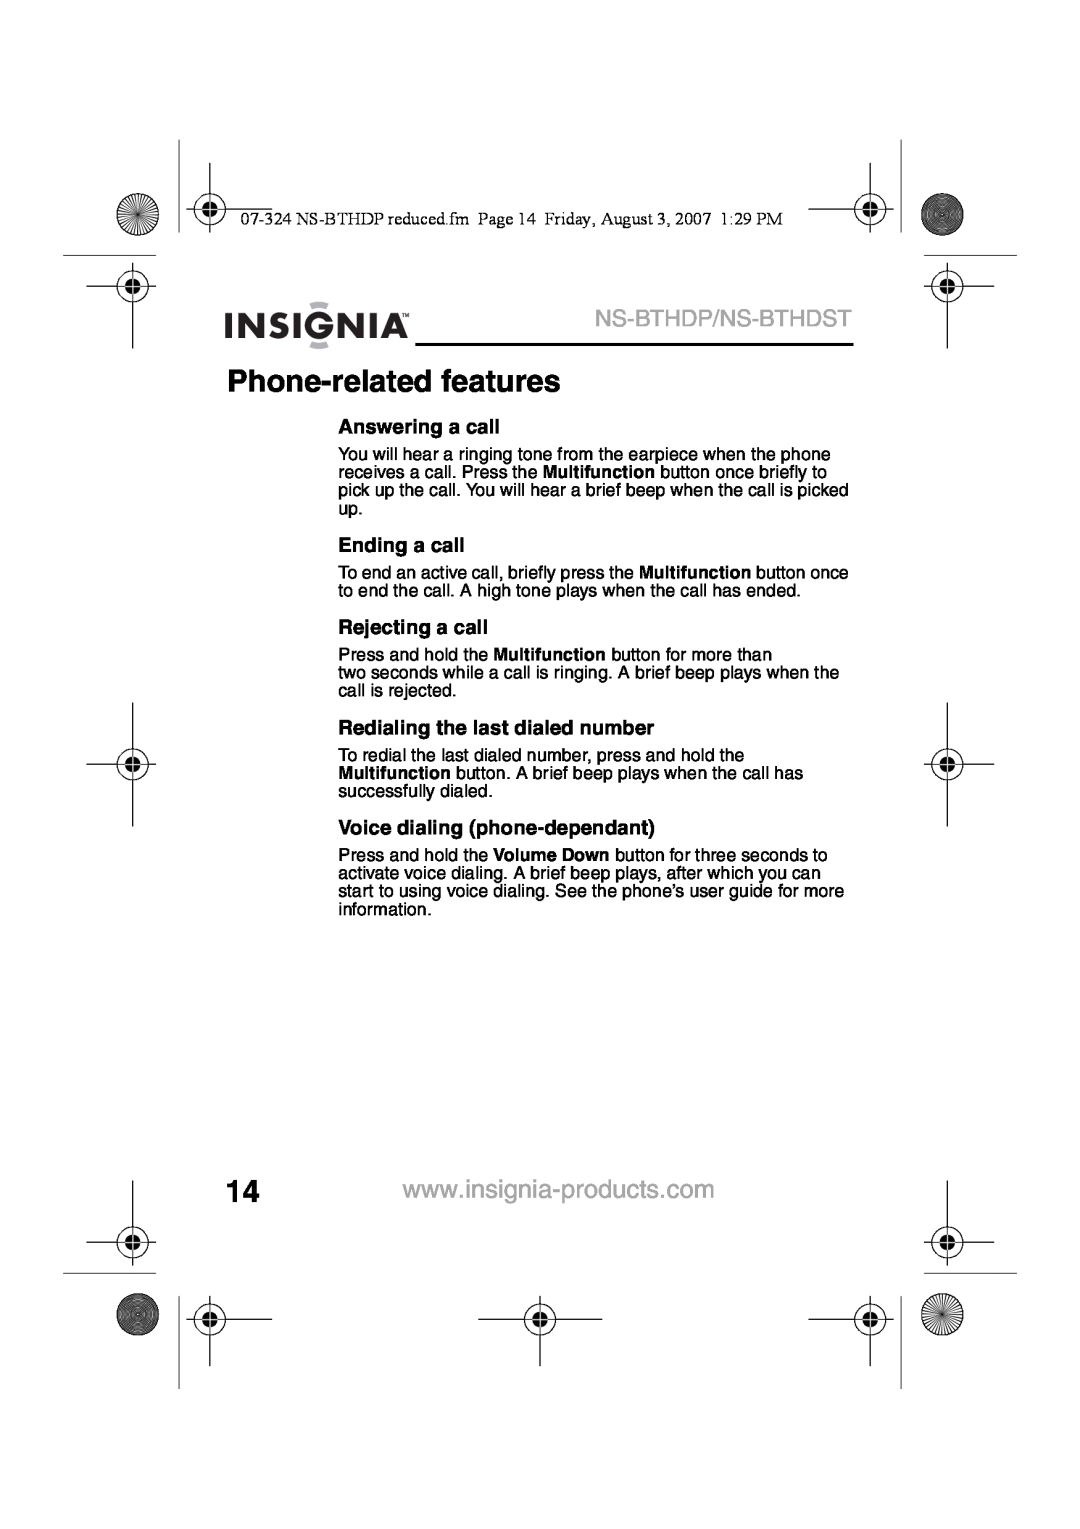 Insignia NS-BTHDST manual Phone-relatedfeatures, Ns-Bthdp/Ns-Bthdst, Answering a call, Ending a call, Rejecting a call 